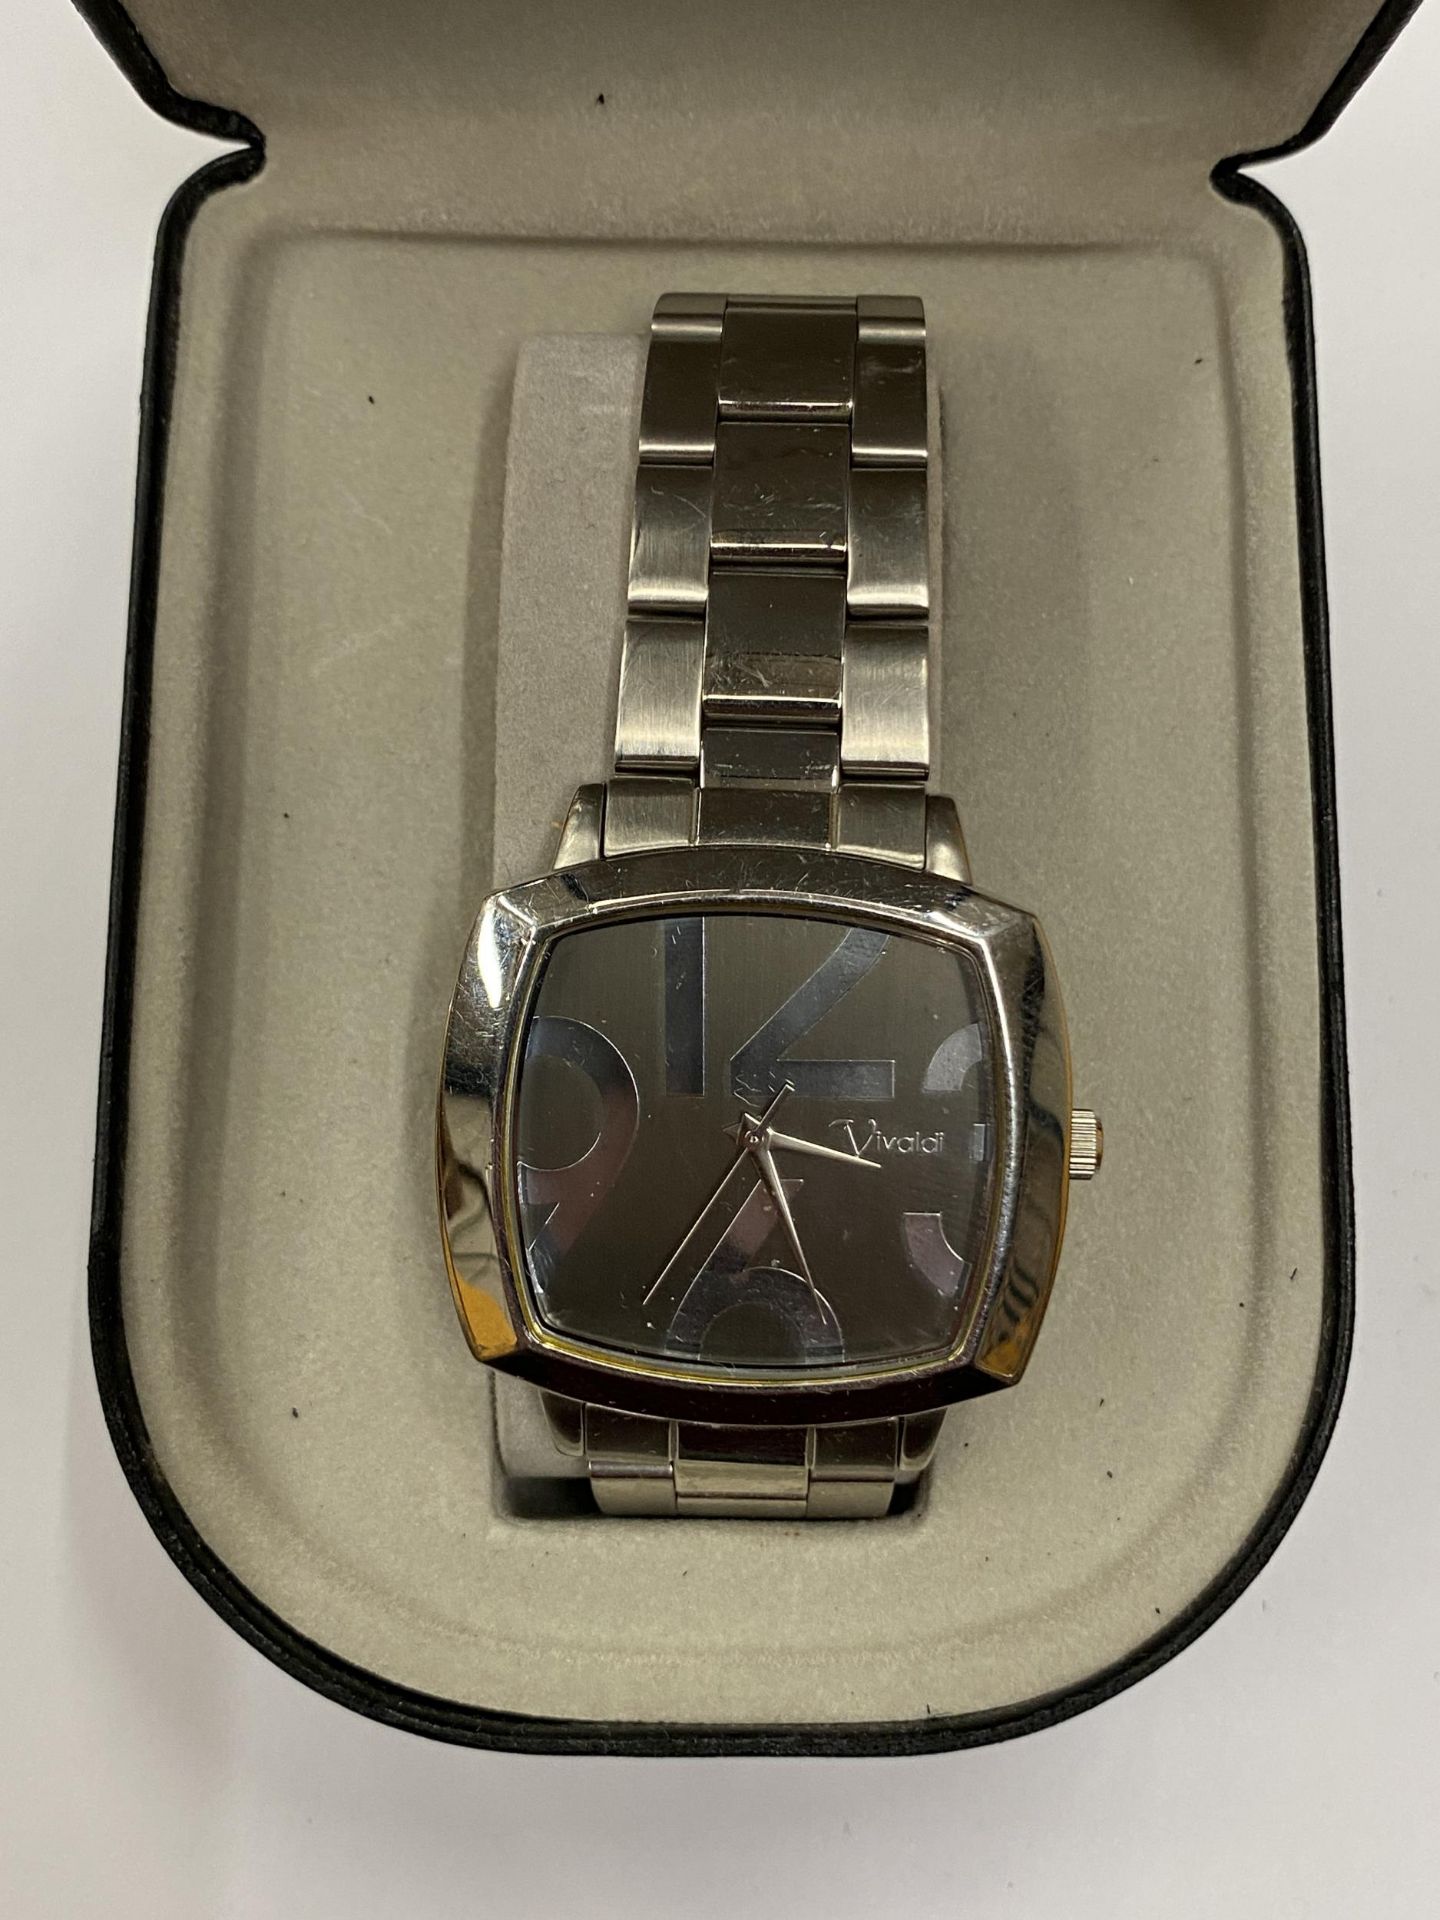 A GENTX BOXED VIVALDI WATCH, WORKING WHEN CATALOGUED BUT NO WARRANTIES GIVEN